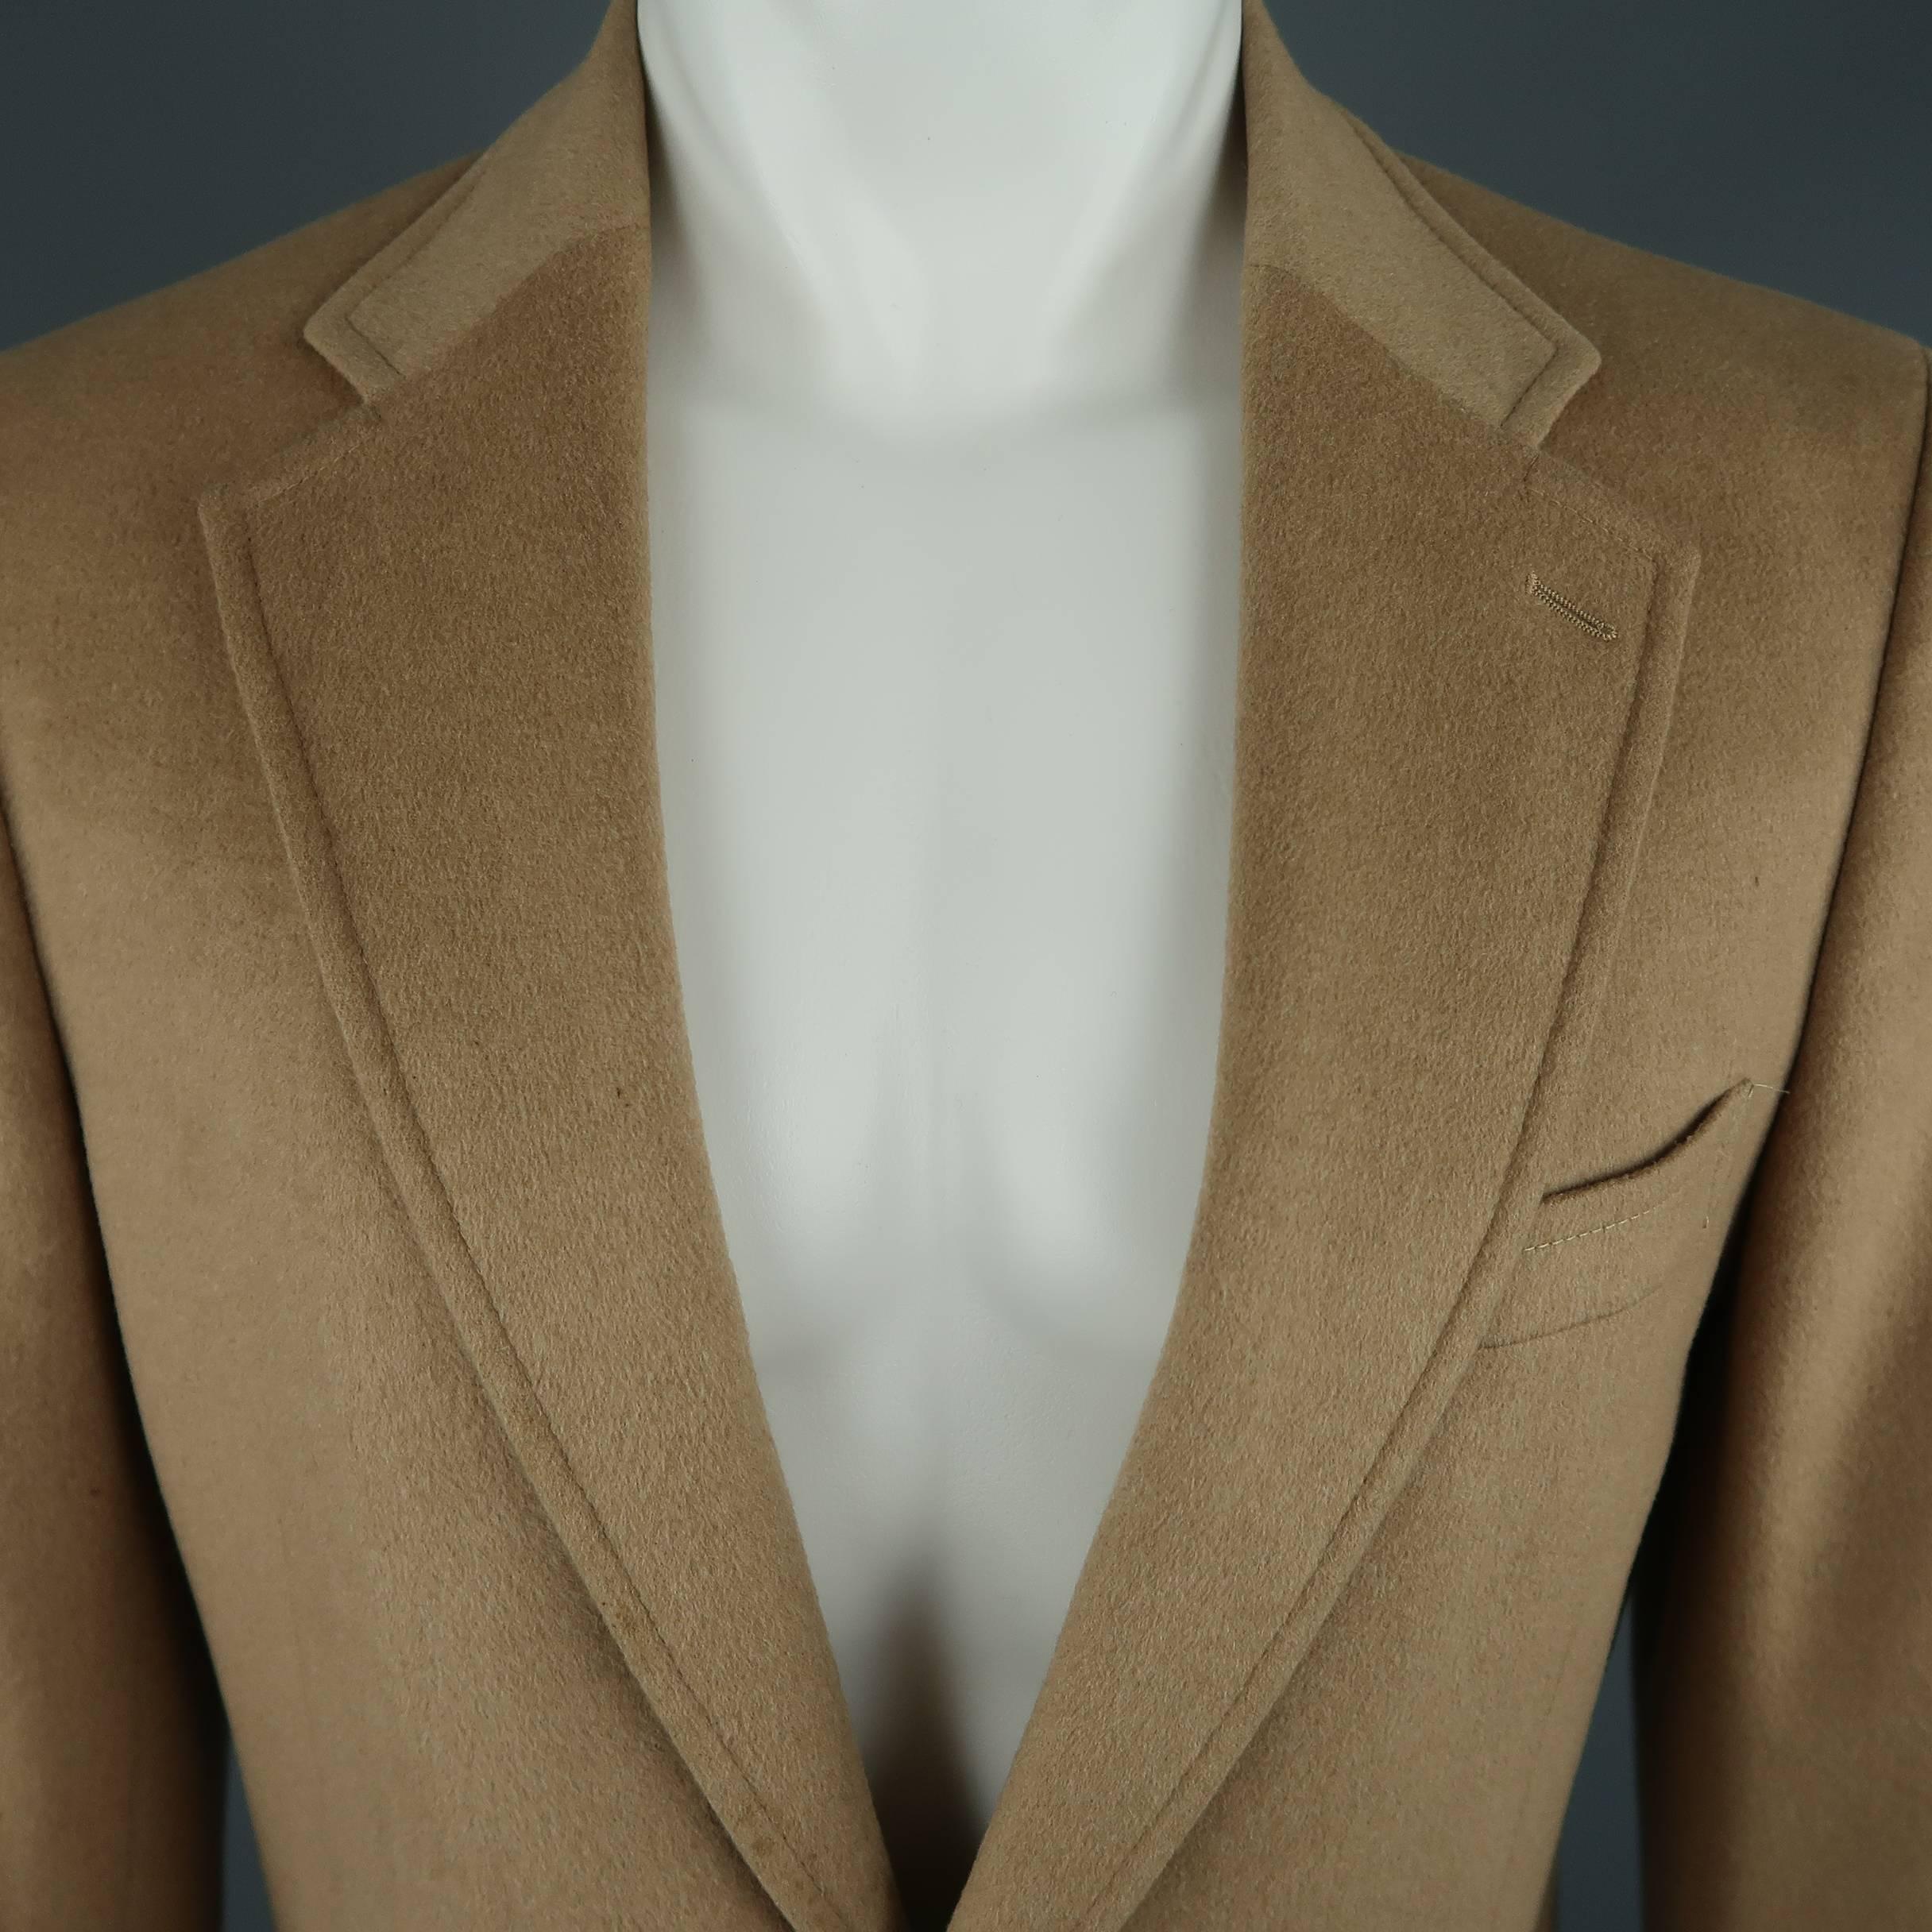 
Prada sport coat comes in tan camel hair and features a notch lapel, two button front, and patch pockets. Stains throughout. As is. Made in Italy.
 
Fair Pre-Owned Condition.
Marked: IT 50 R
 
Measurements:
 

    Shoulder: 17 in.
    Chest: 40